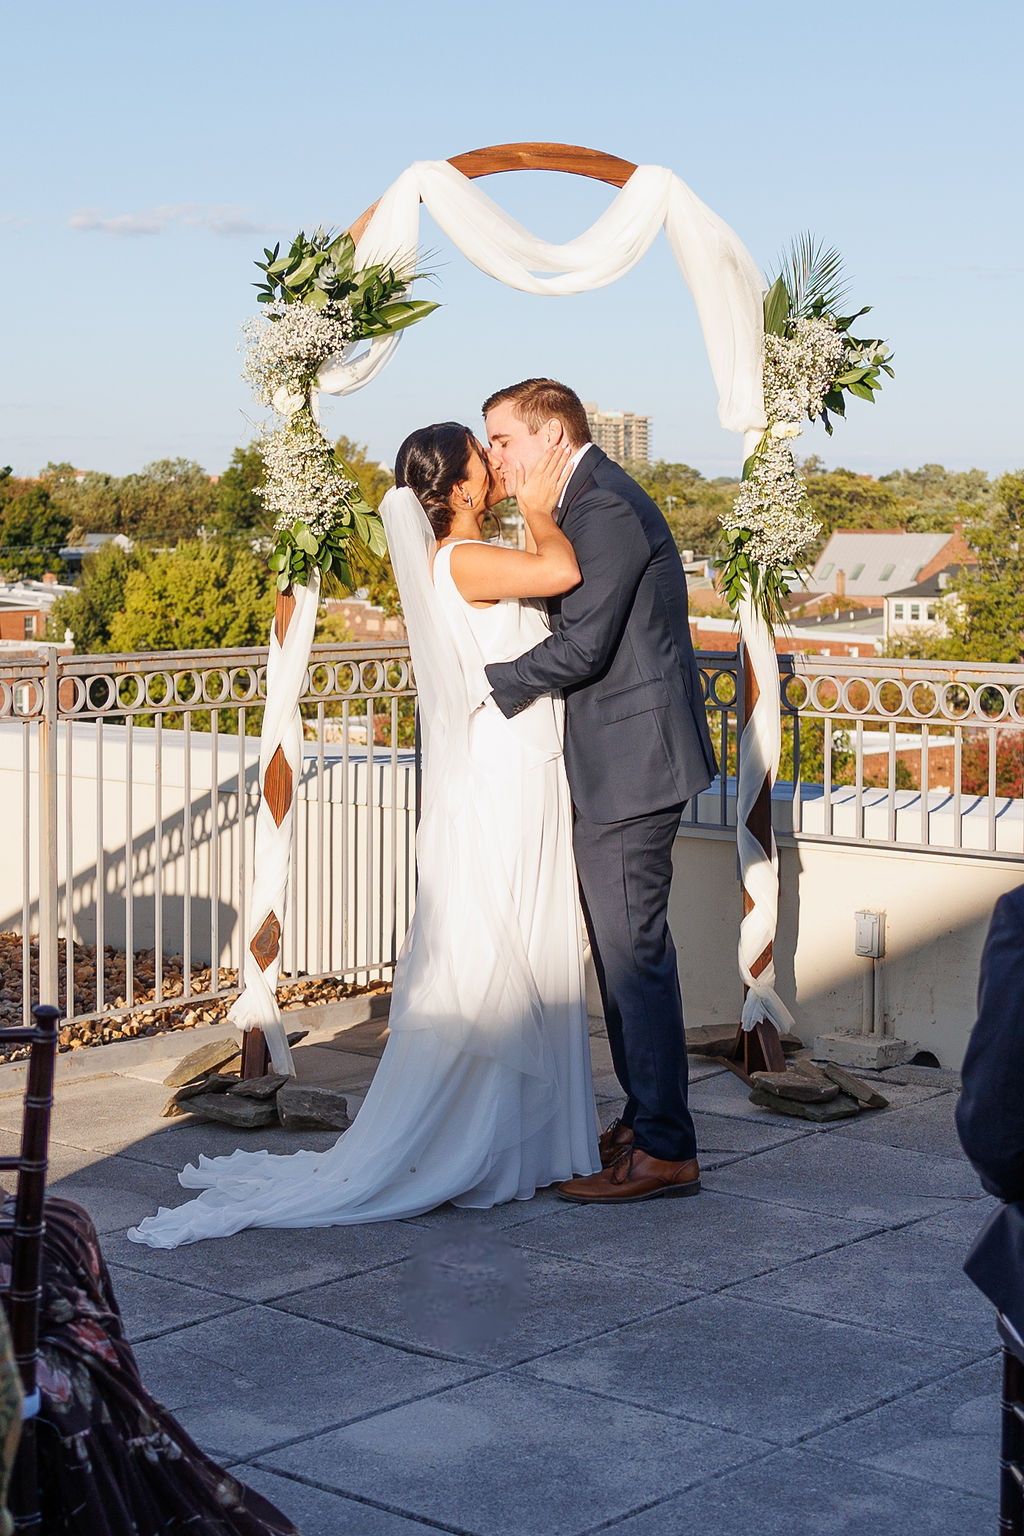 Newlyweds share a big kiss under the arbor to end their rooftop lorien hotel wedding ceremony